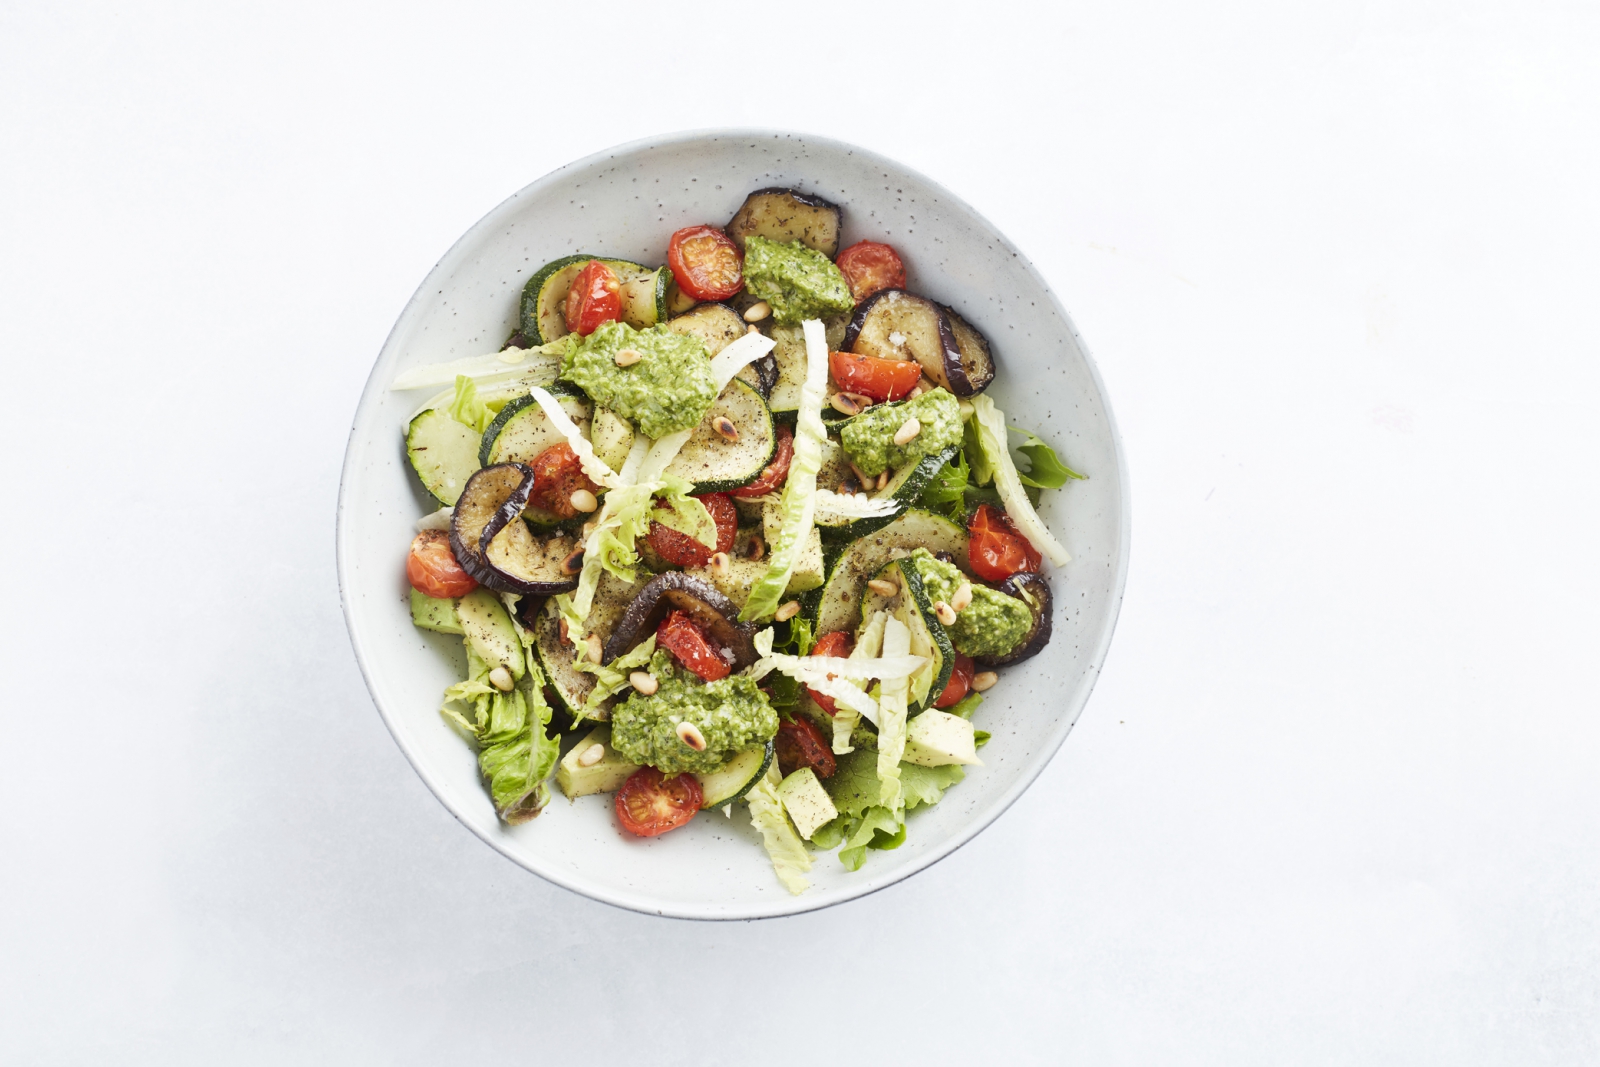 Grilled vegetable salad with pesto from our Start to Keto eBook